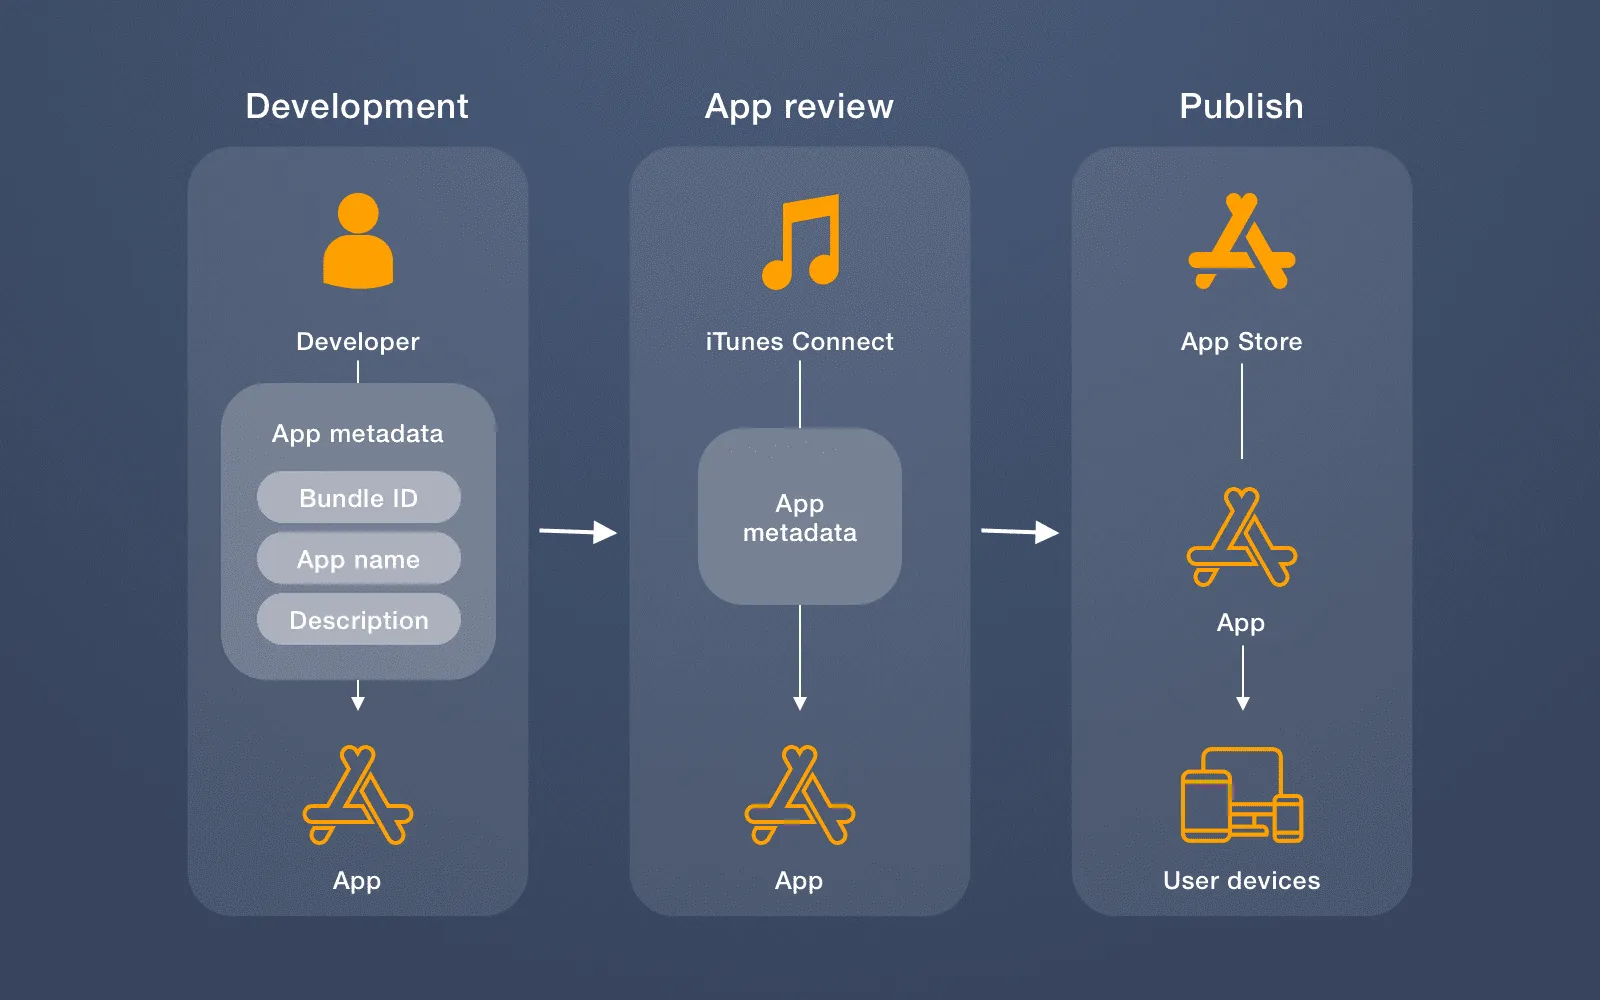 How the process of publishing an app to the app store looks like